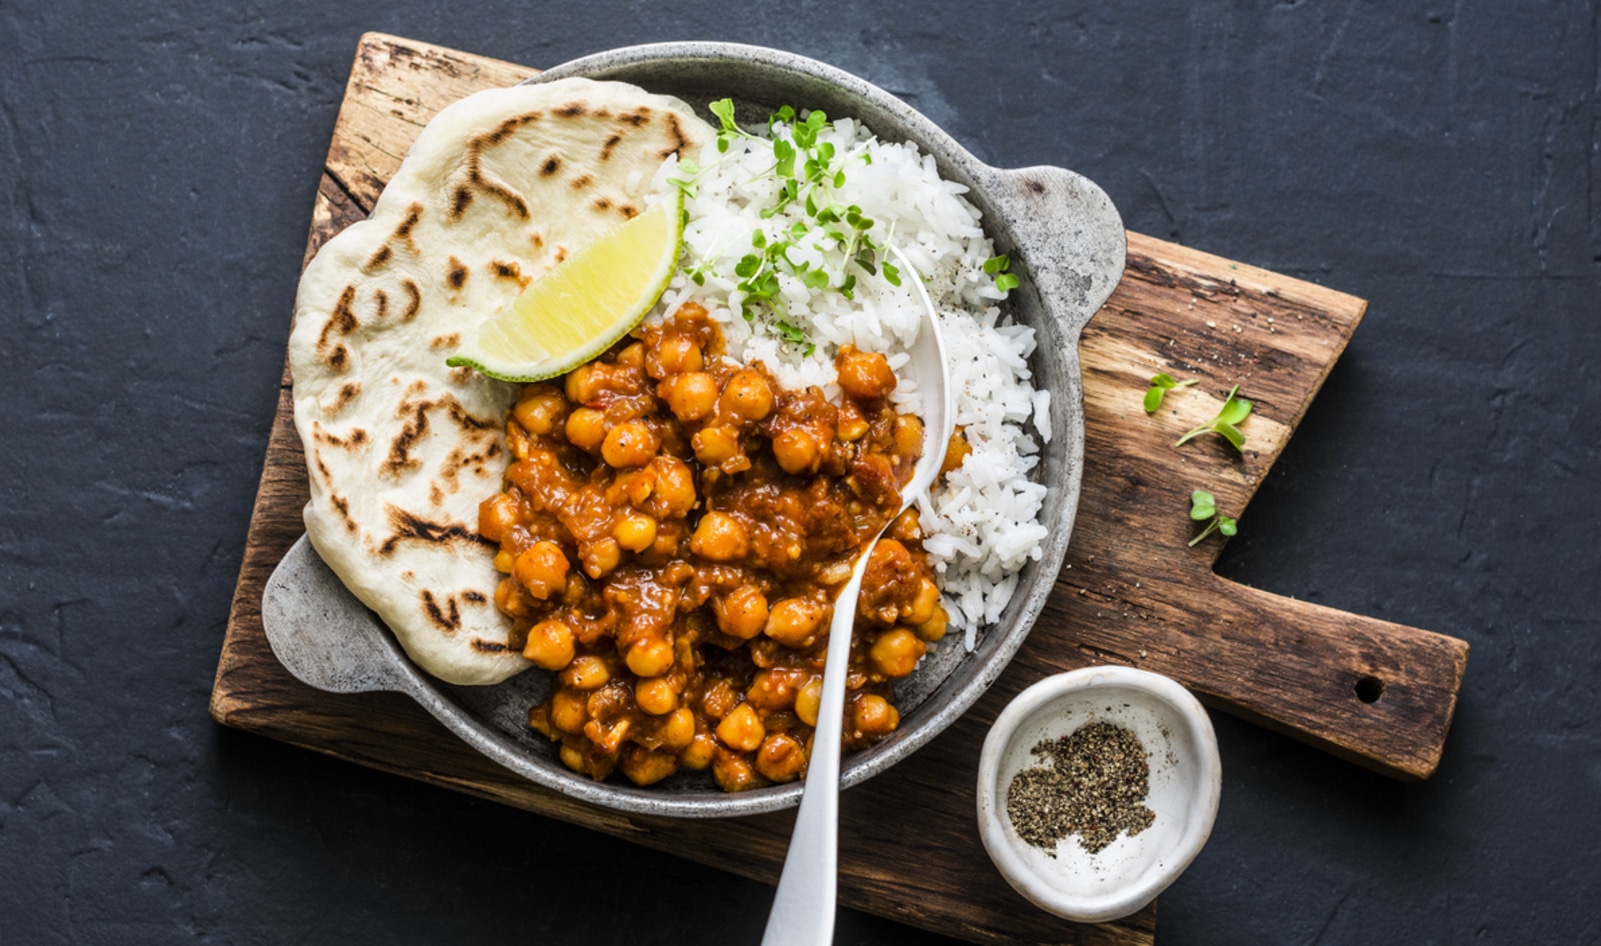 Vegan Indian Food: From Samosas to Daal, Here's Everything You Need to Eat